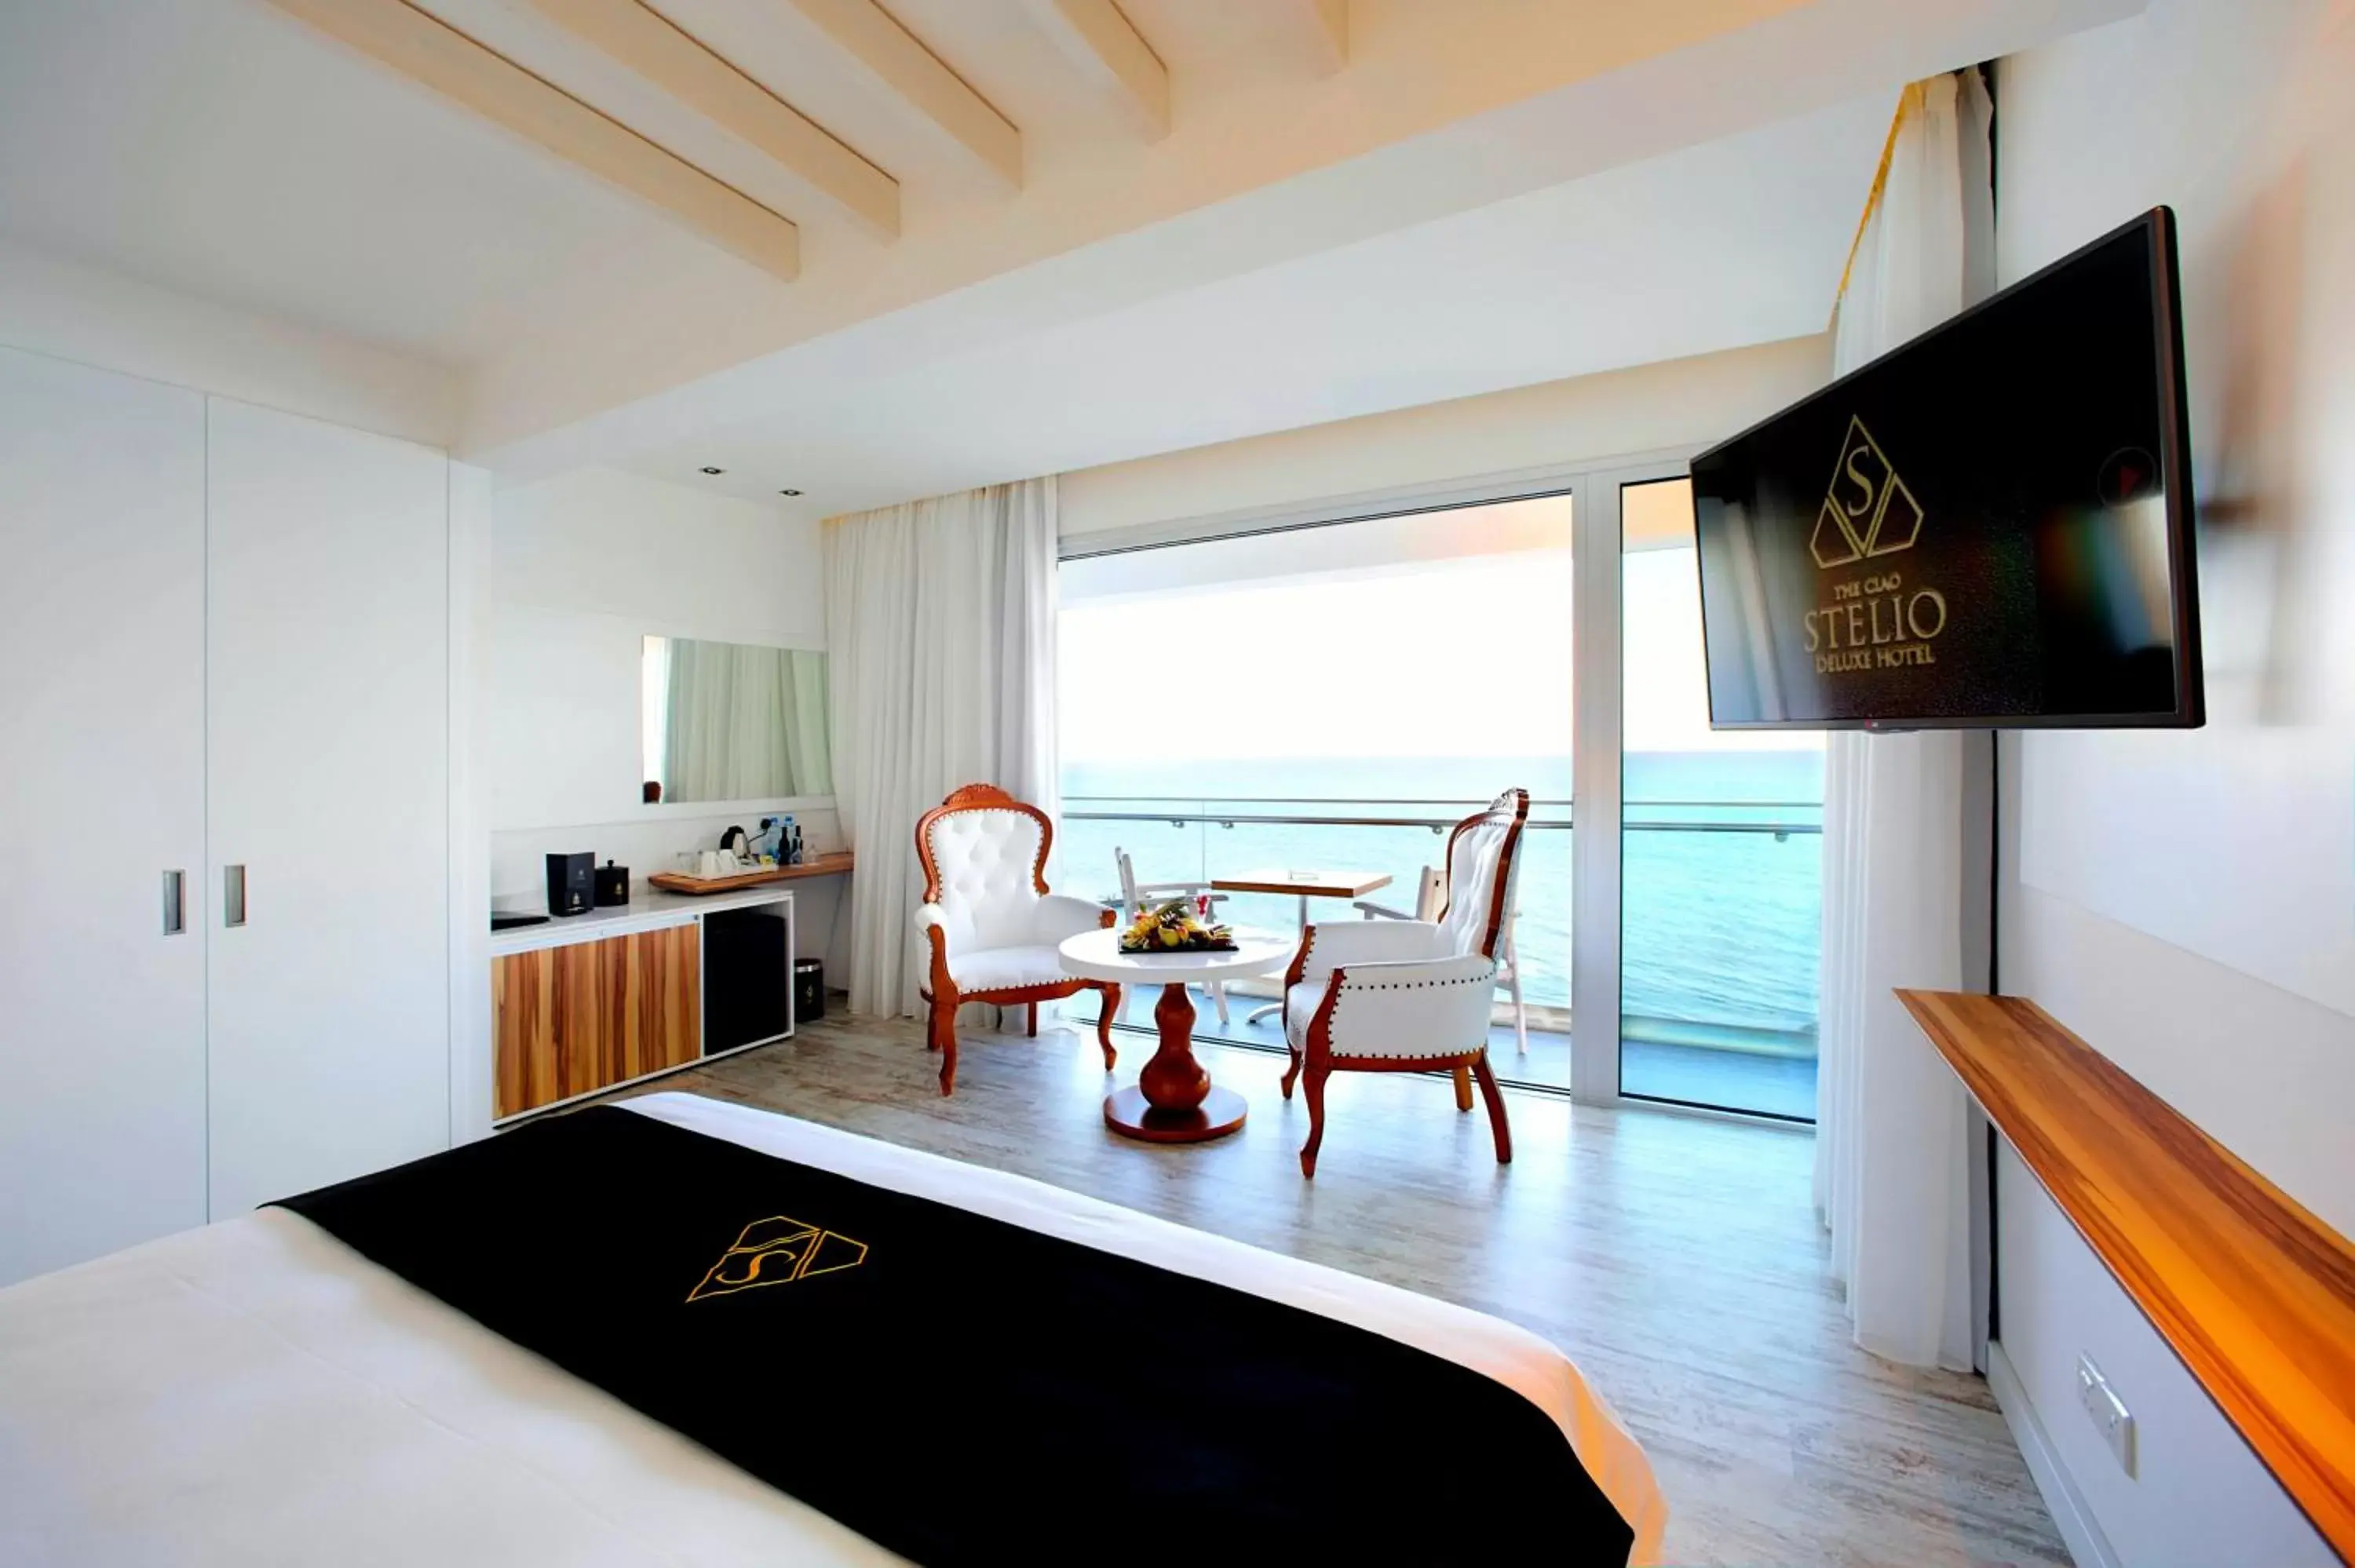 Deluxe Double Room with Sea View in The Ciao Stelio Deluxe Hotel (Adults Only)